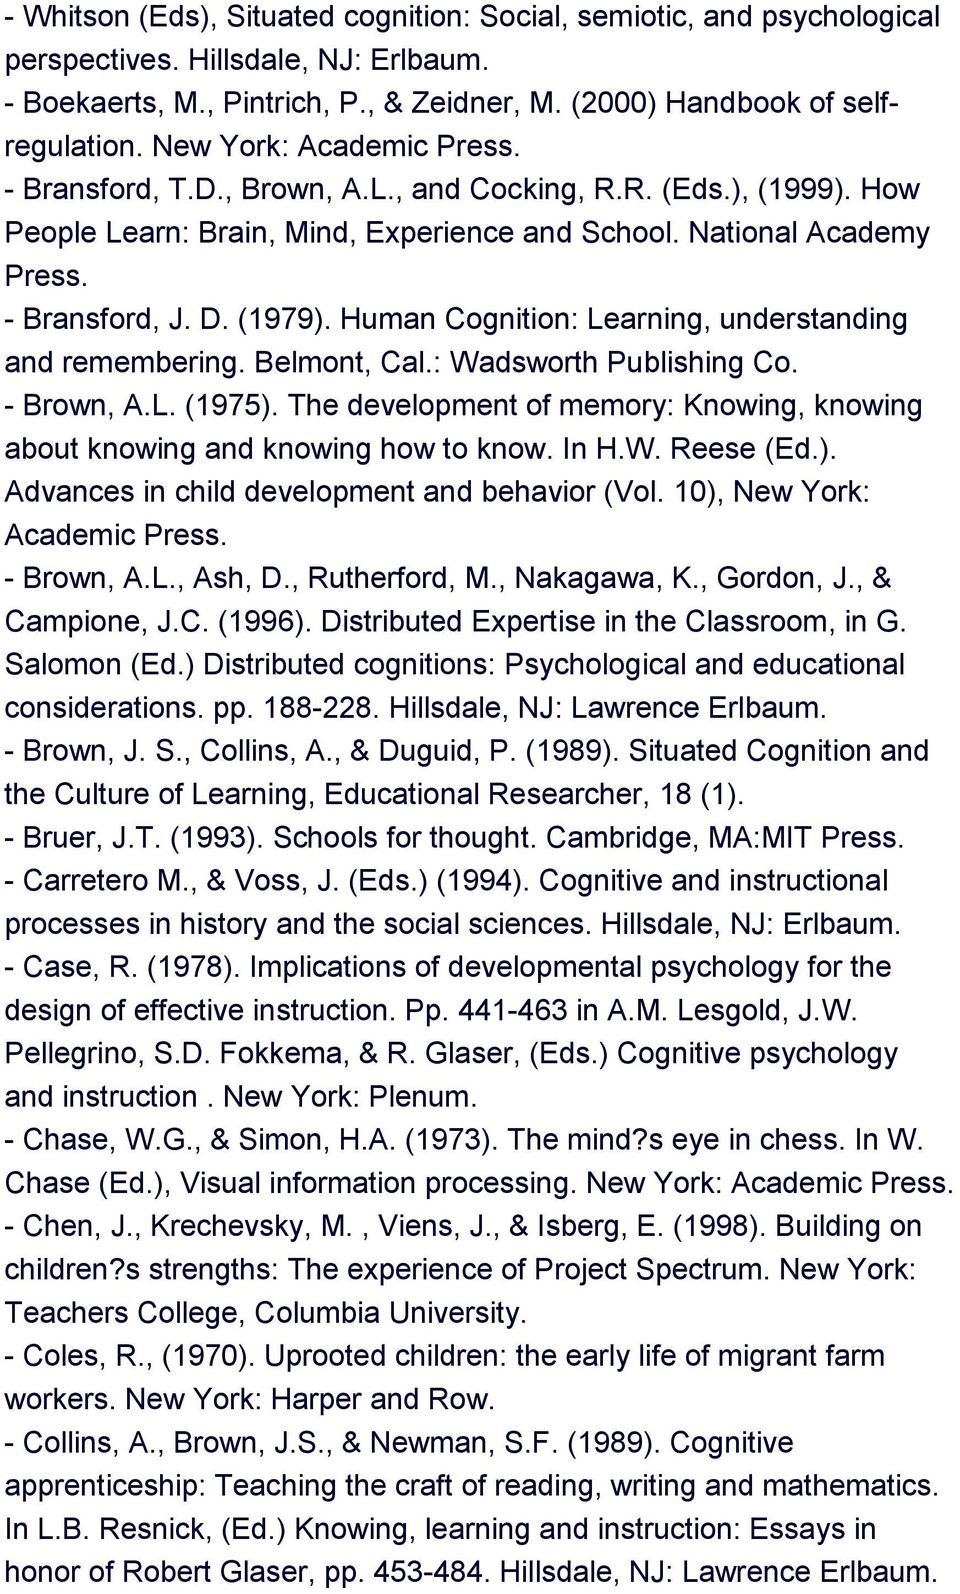 Human Cognition: Learning, understanding and remembering. Belmont, Cal.: Wadsworth Publishing Co. - Brown, A.L. (1975).